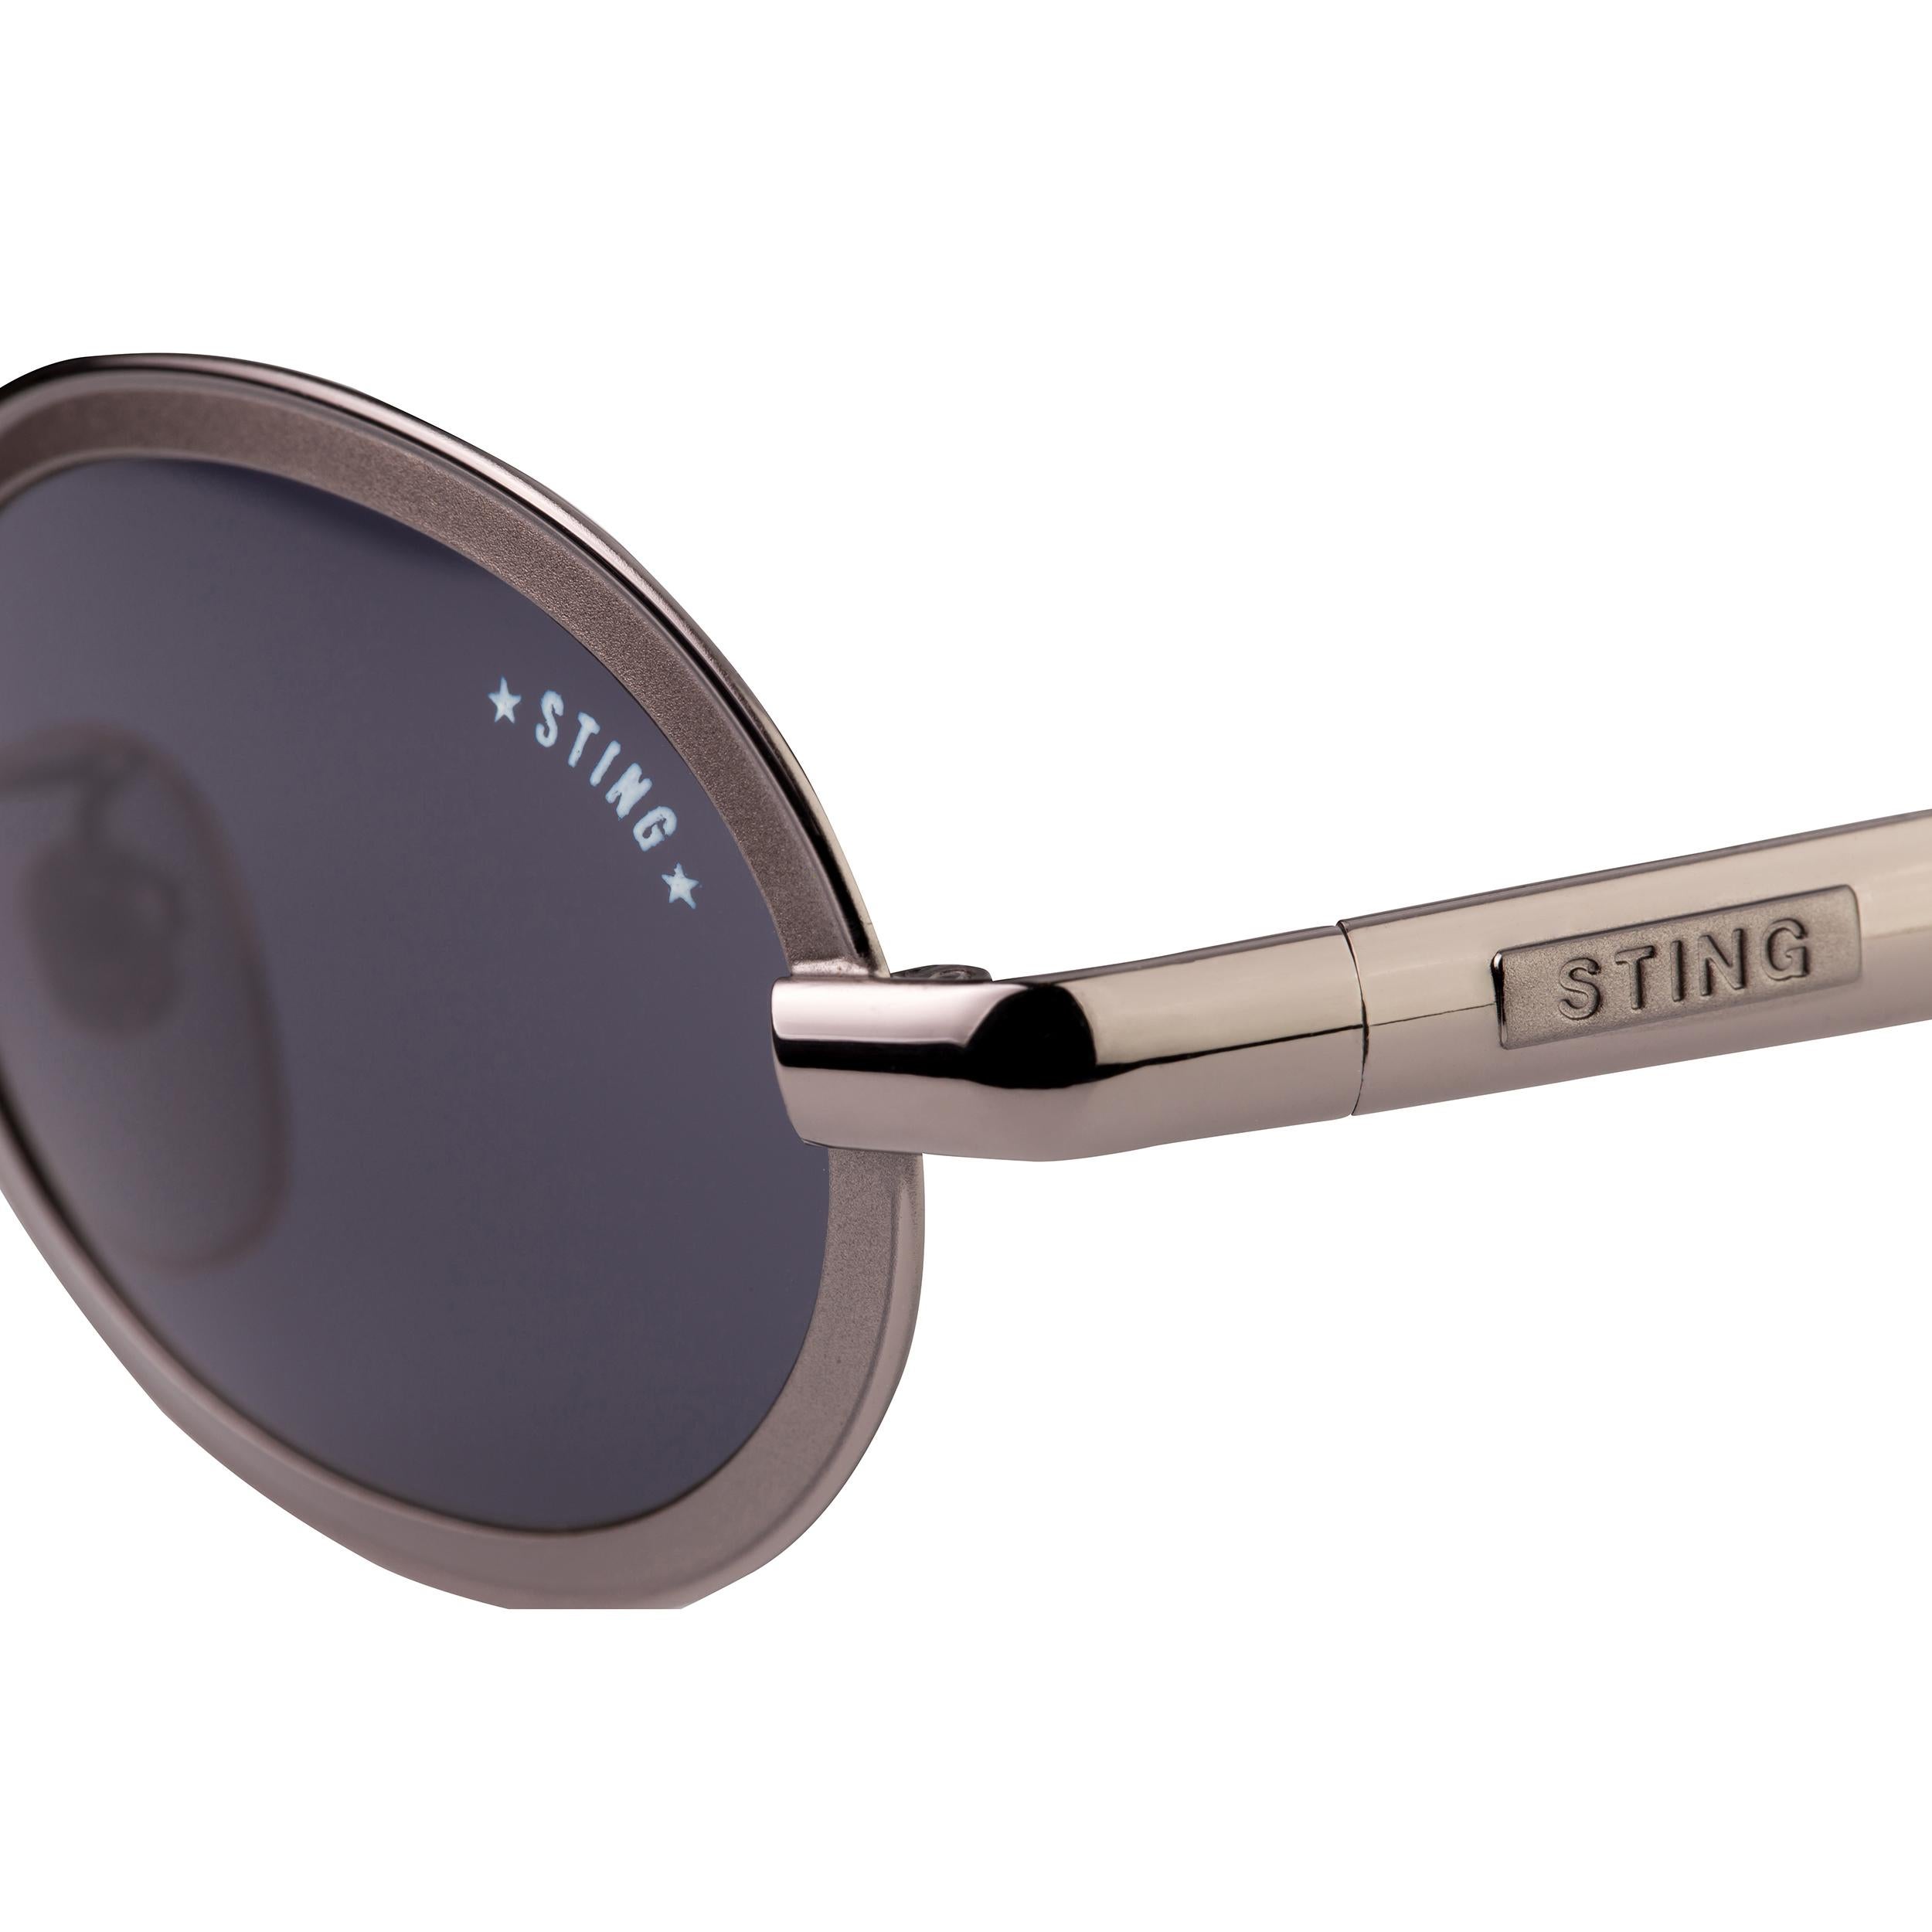 Sting small round sunglasses spring hinges, Italy  In New Condition For Sale In Santa Clarita, CA